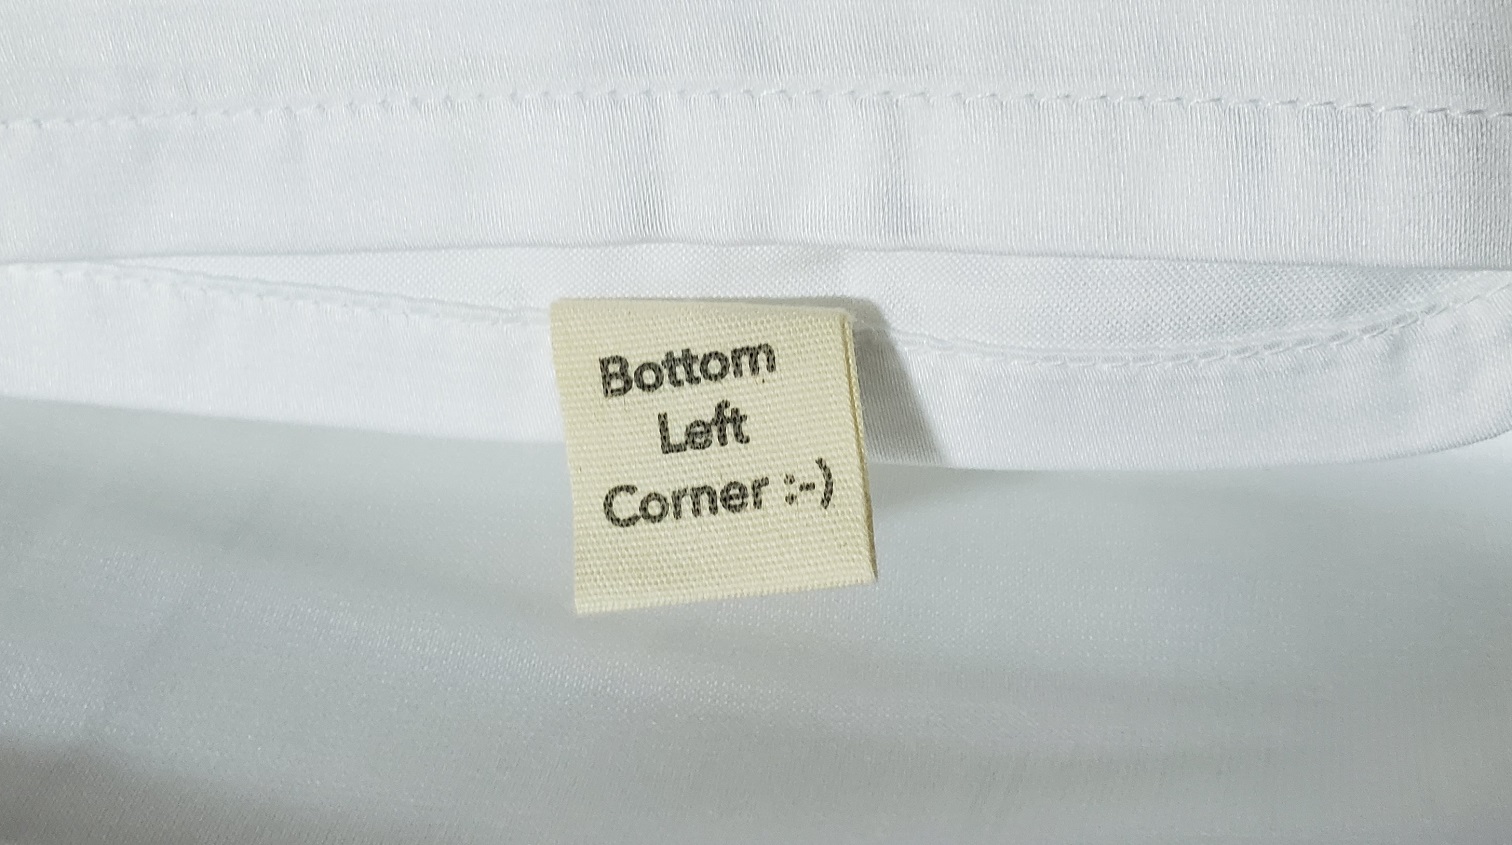 a tag which says "Bottom Left Corner"